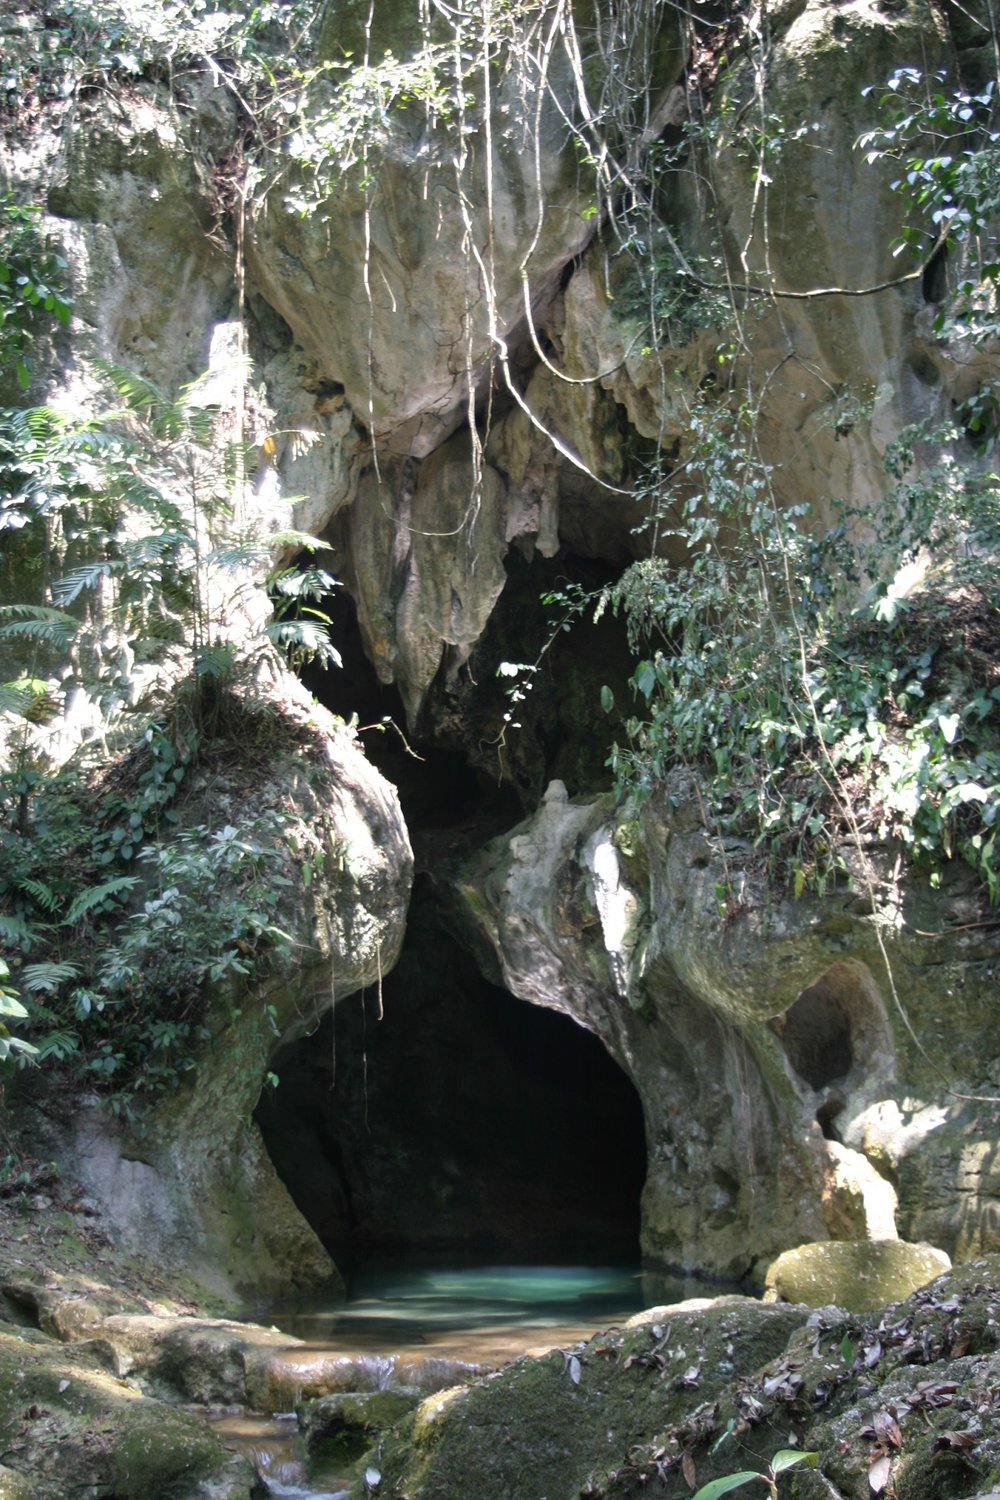 The mouth of ATM Cave